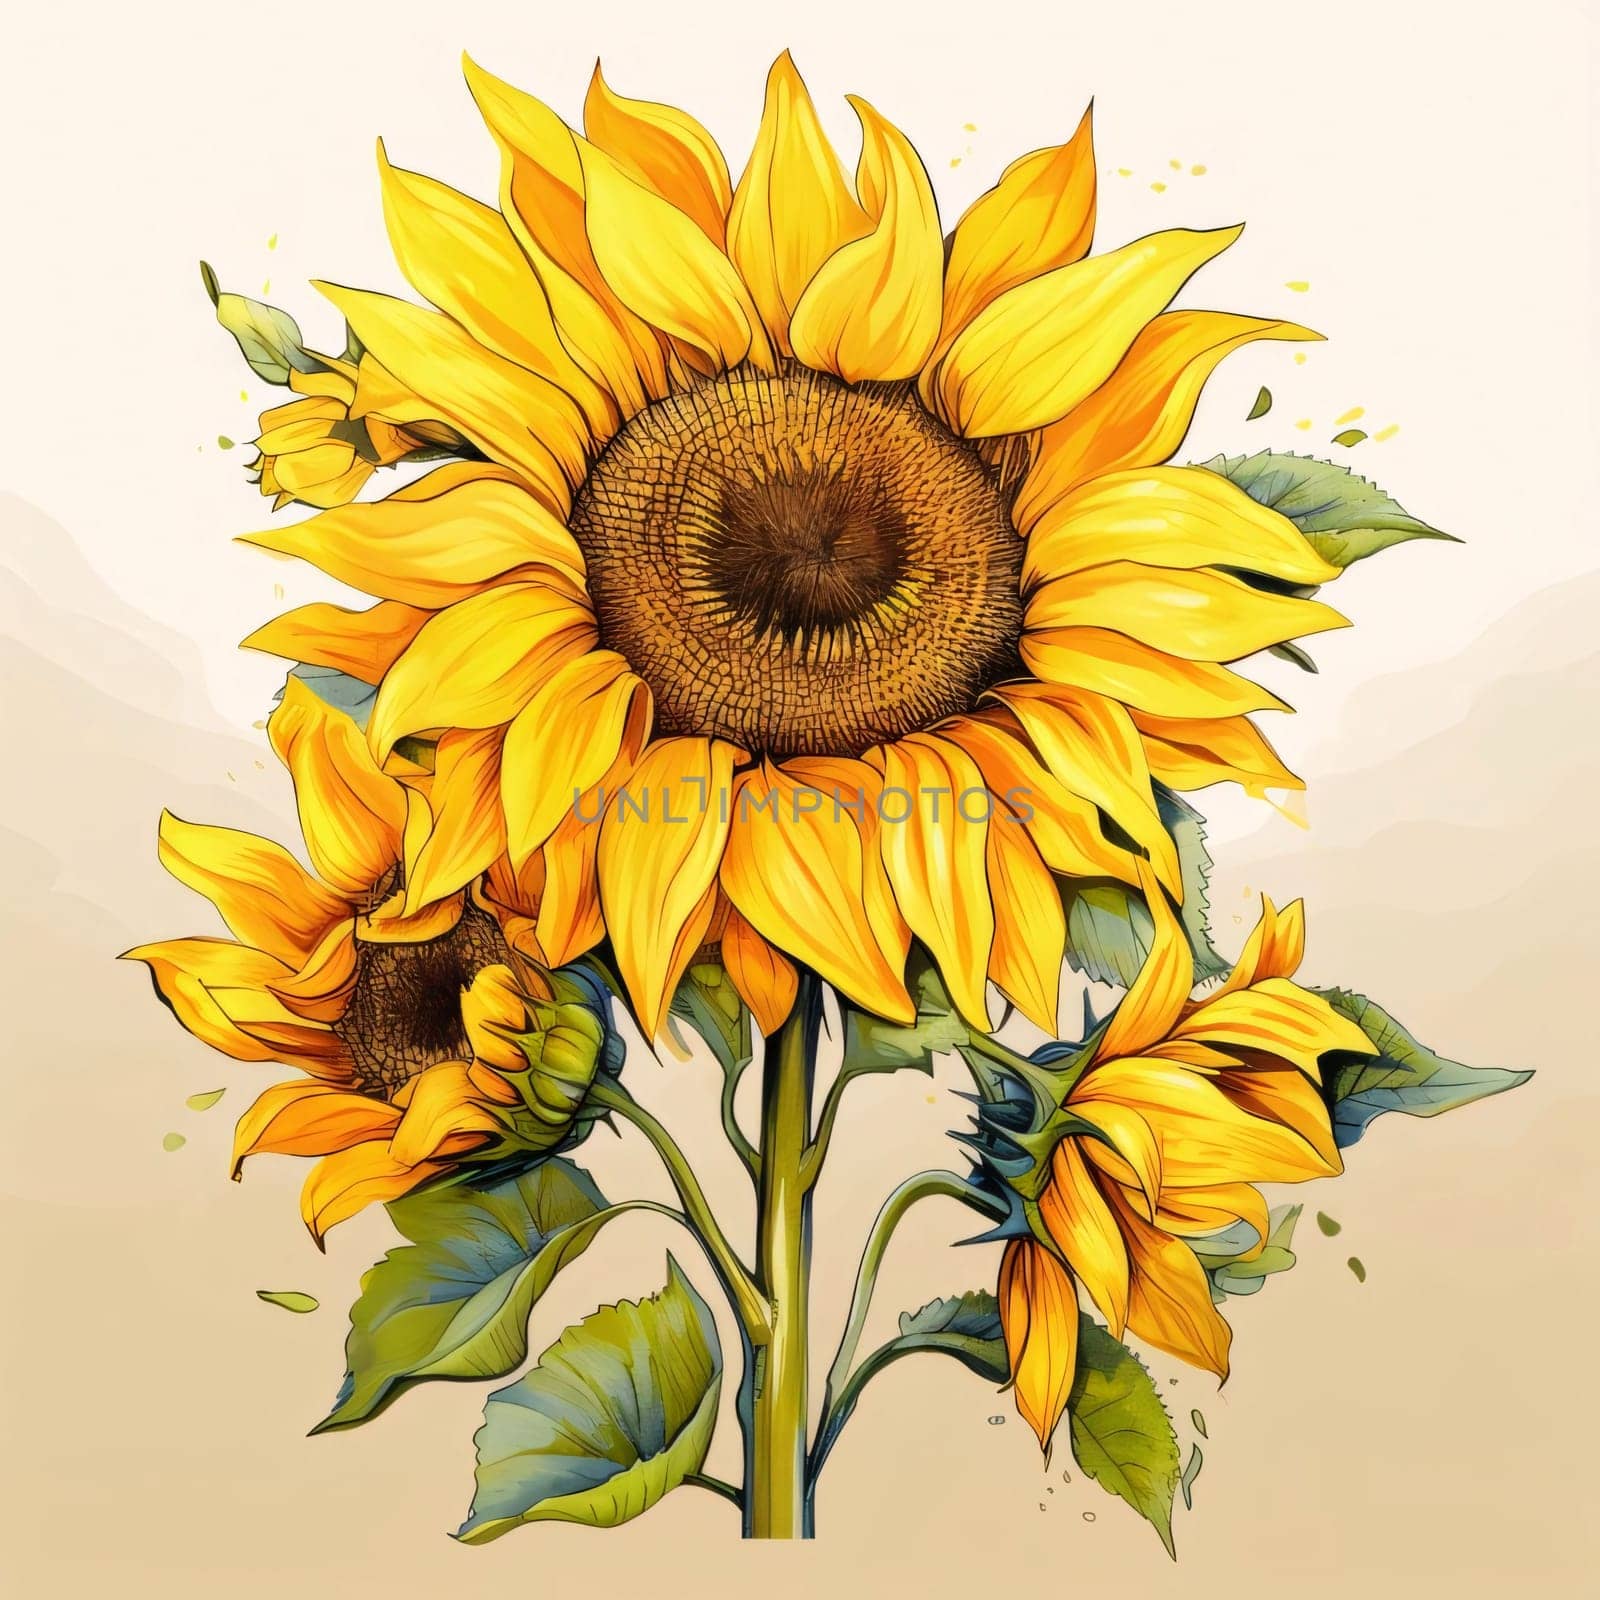 Painted with watercolor paints sunflowers on a bright background. Flowering flowers, a symbol of spring, new life. A joyful time of nature waking up to life.